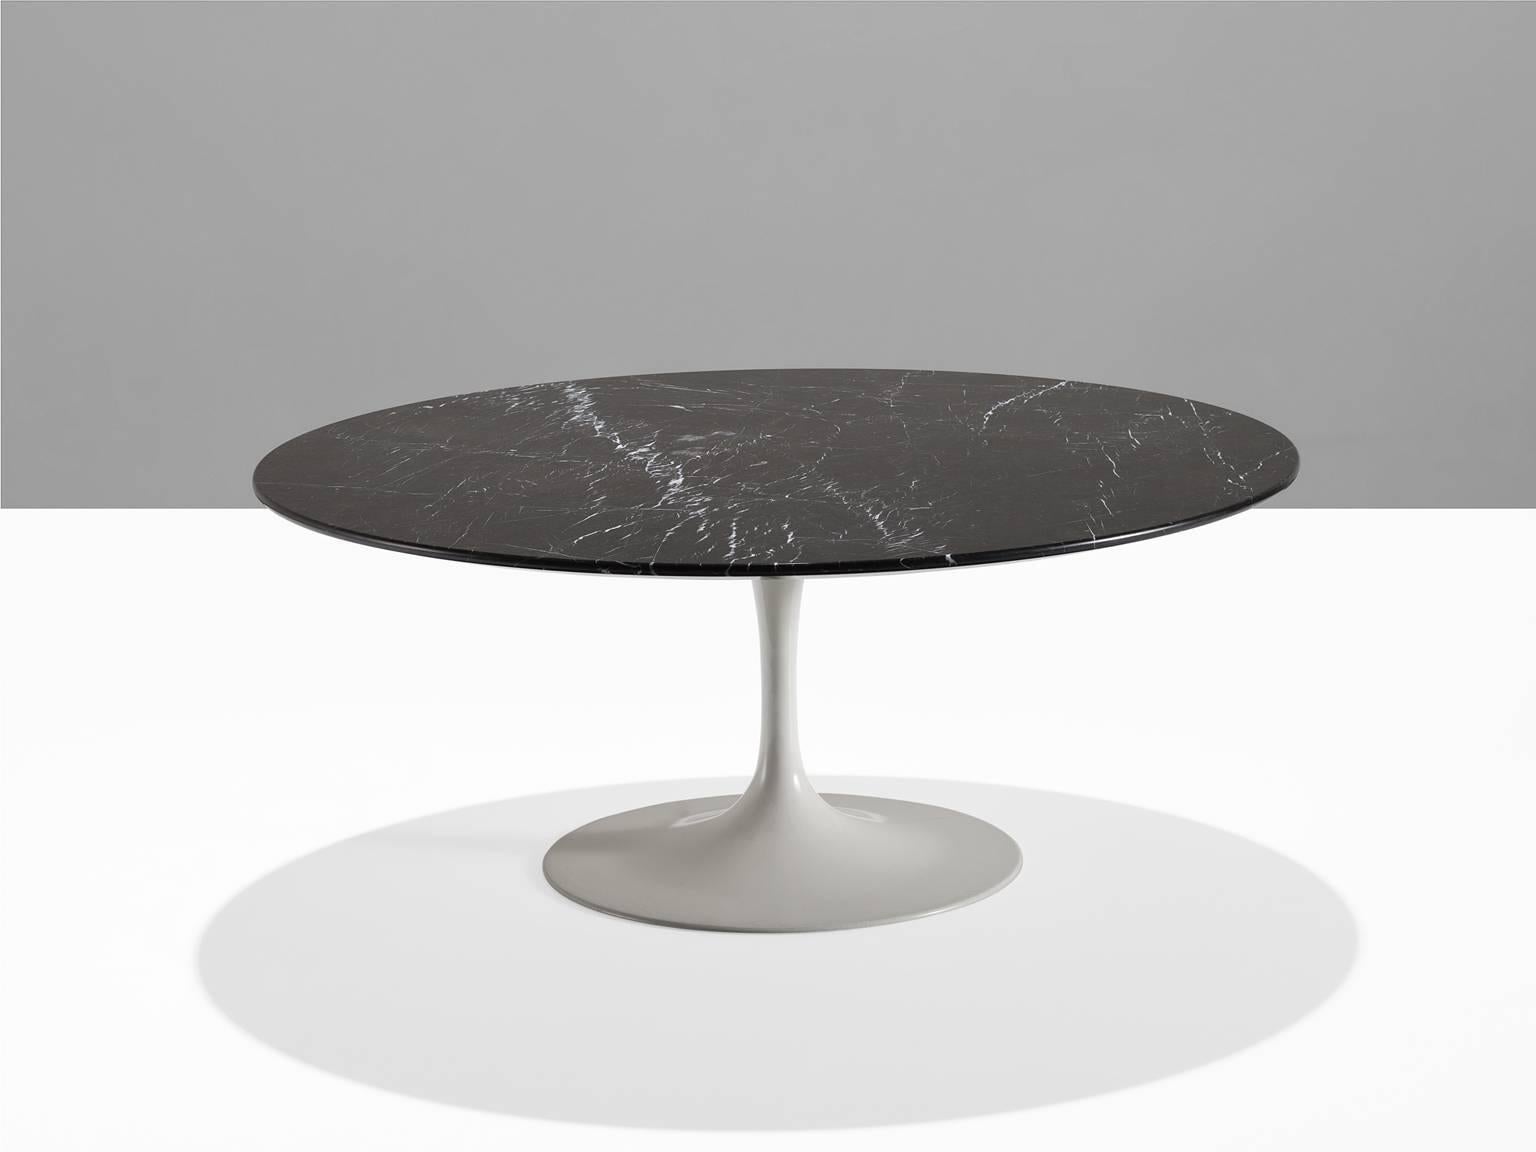 Cocktail table, Nero Marquina marble top, United States, 1957.

This iconic tulip table is designed by Eero Saarinen in the fifties and it took him five years to arrive at this exact design. The table was designed to create peaceful interiors in